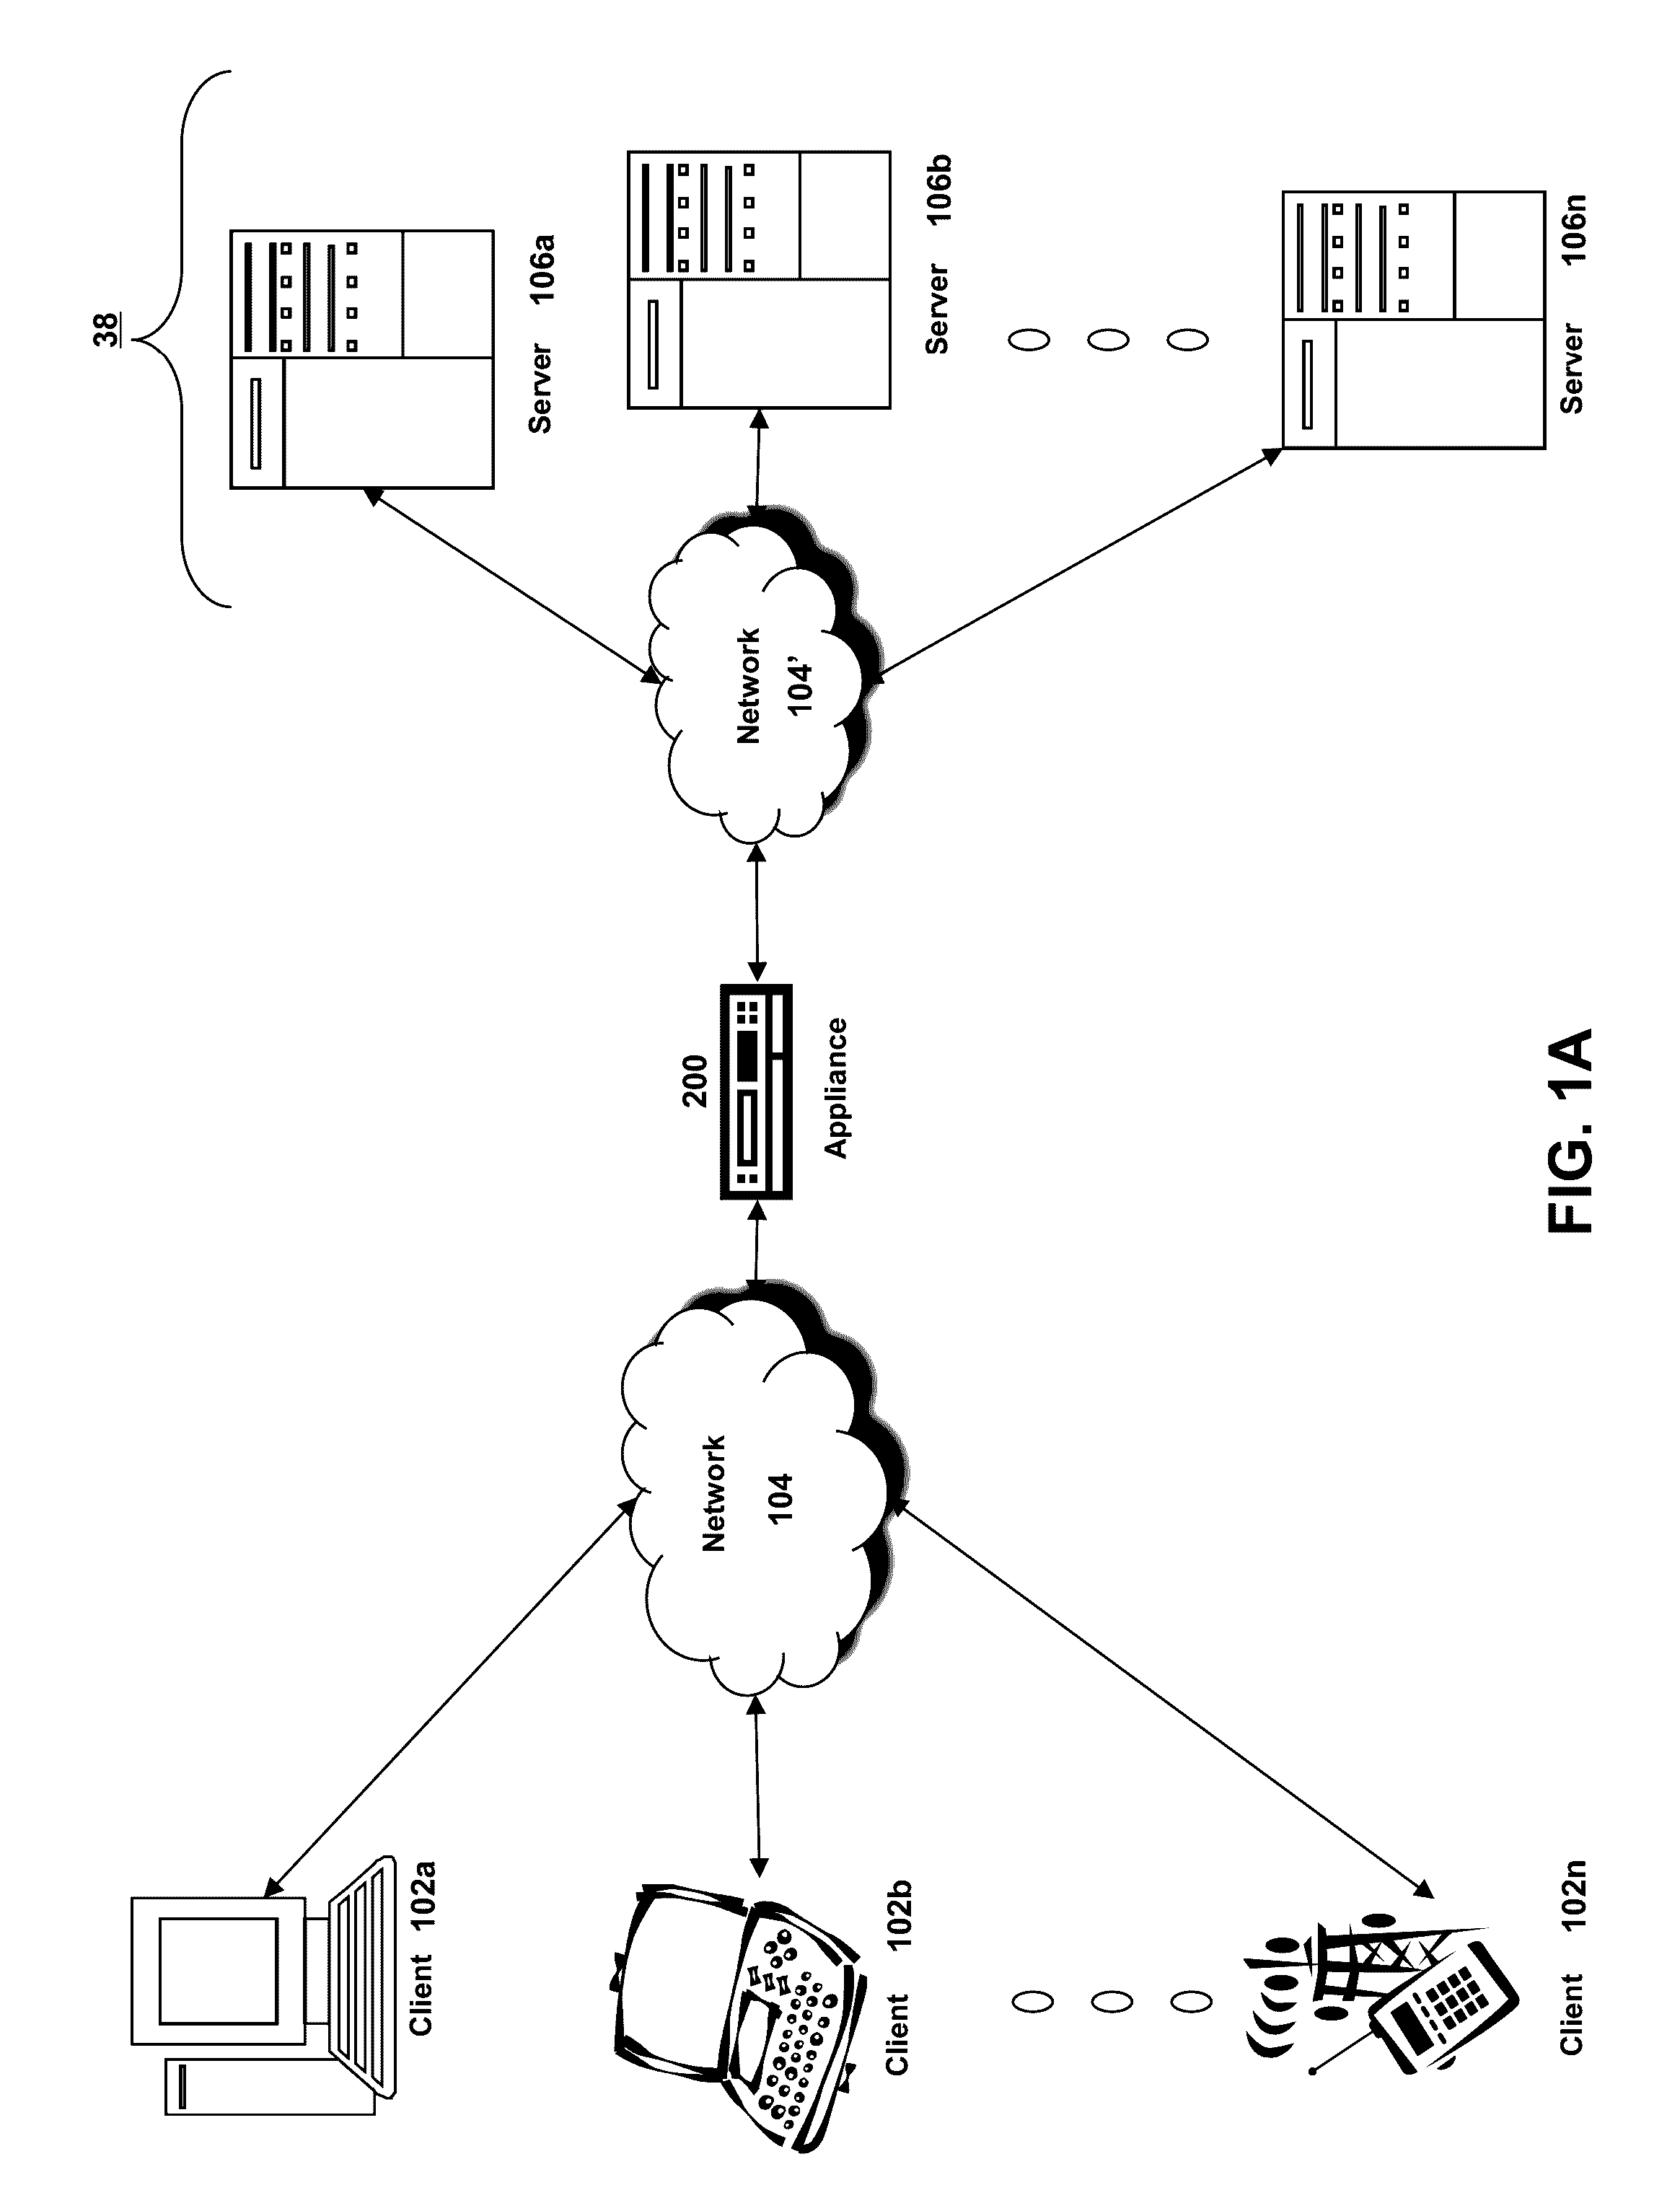 Systems and methods for performing load balancing and message routing for short message peer to peer protocol